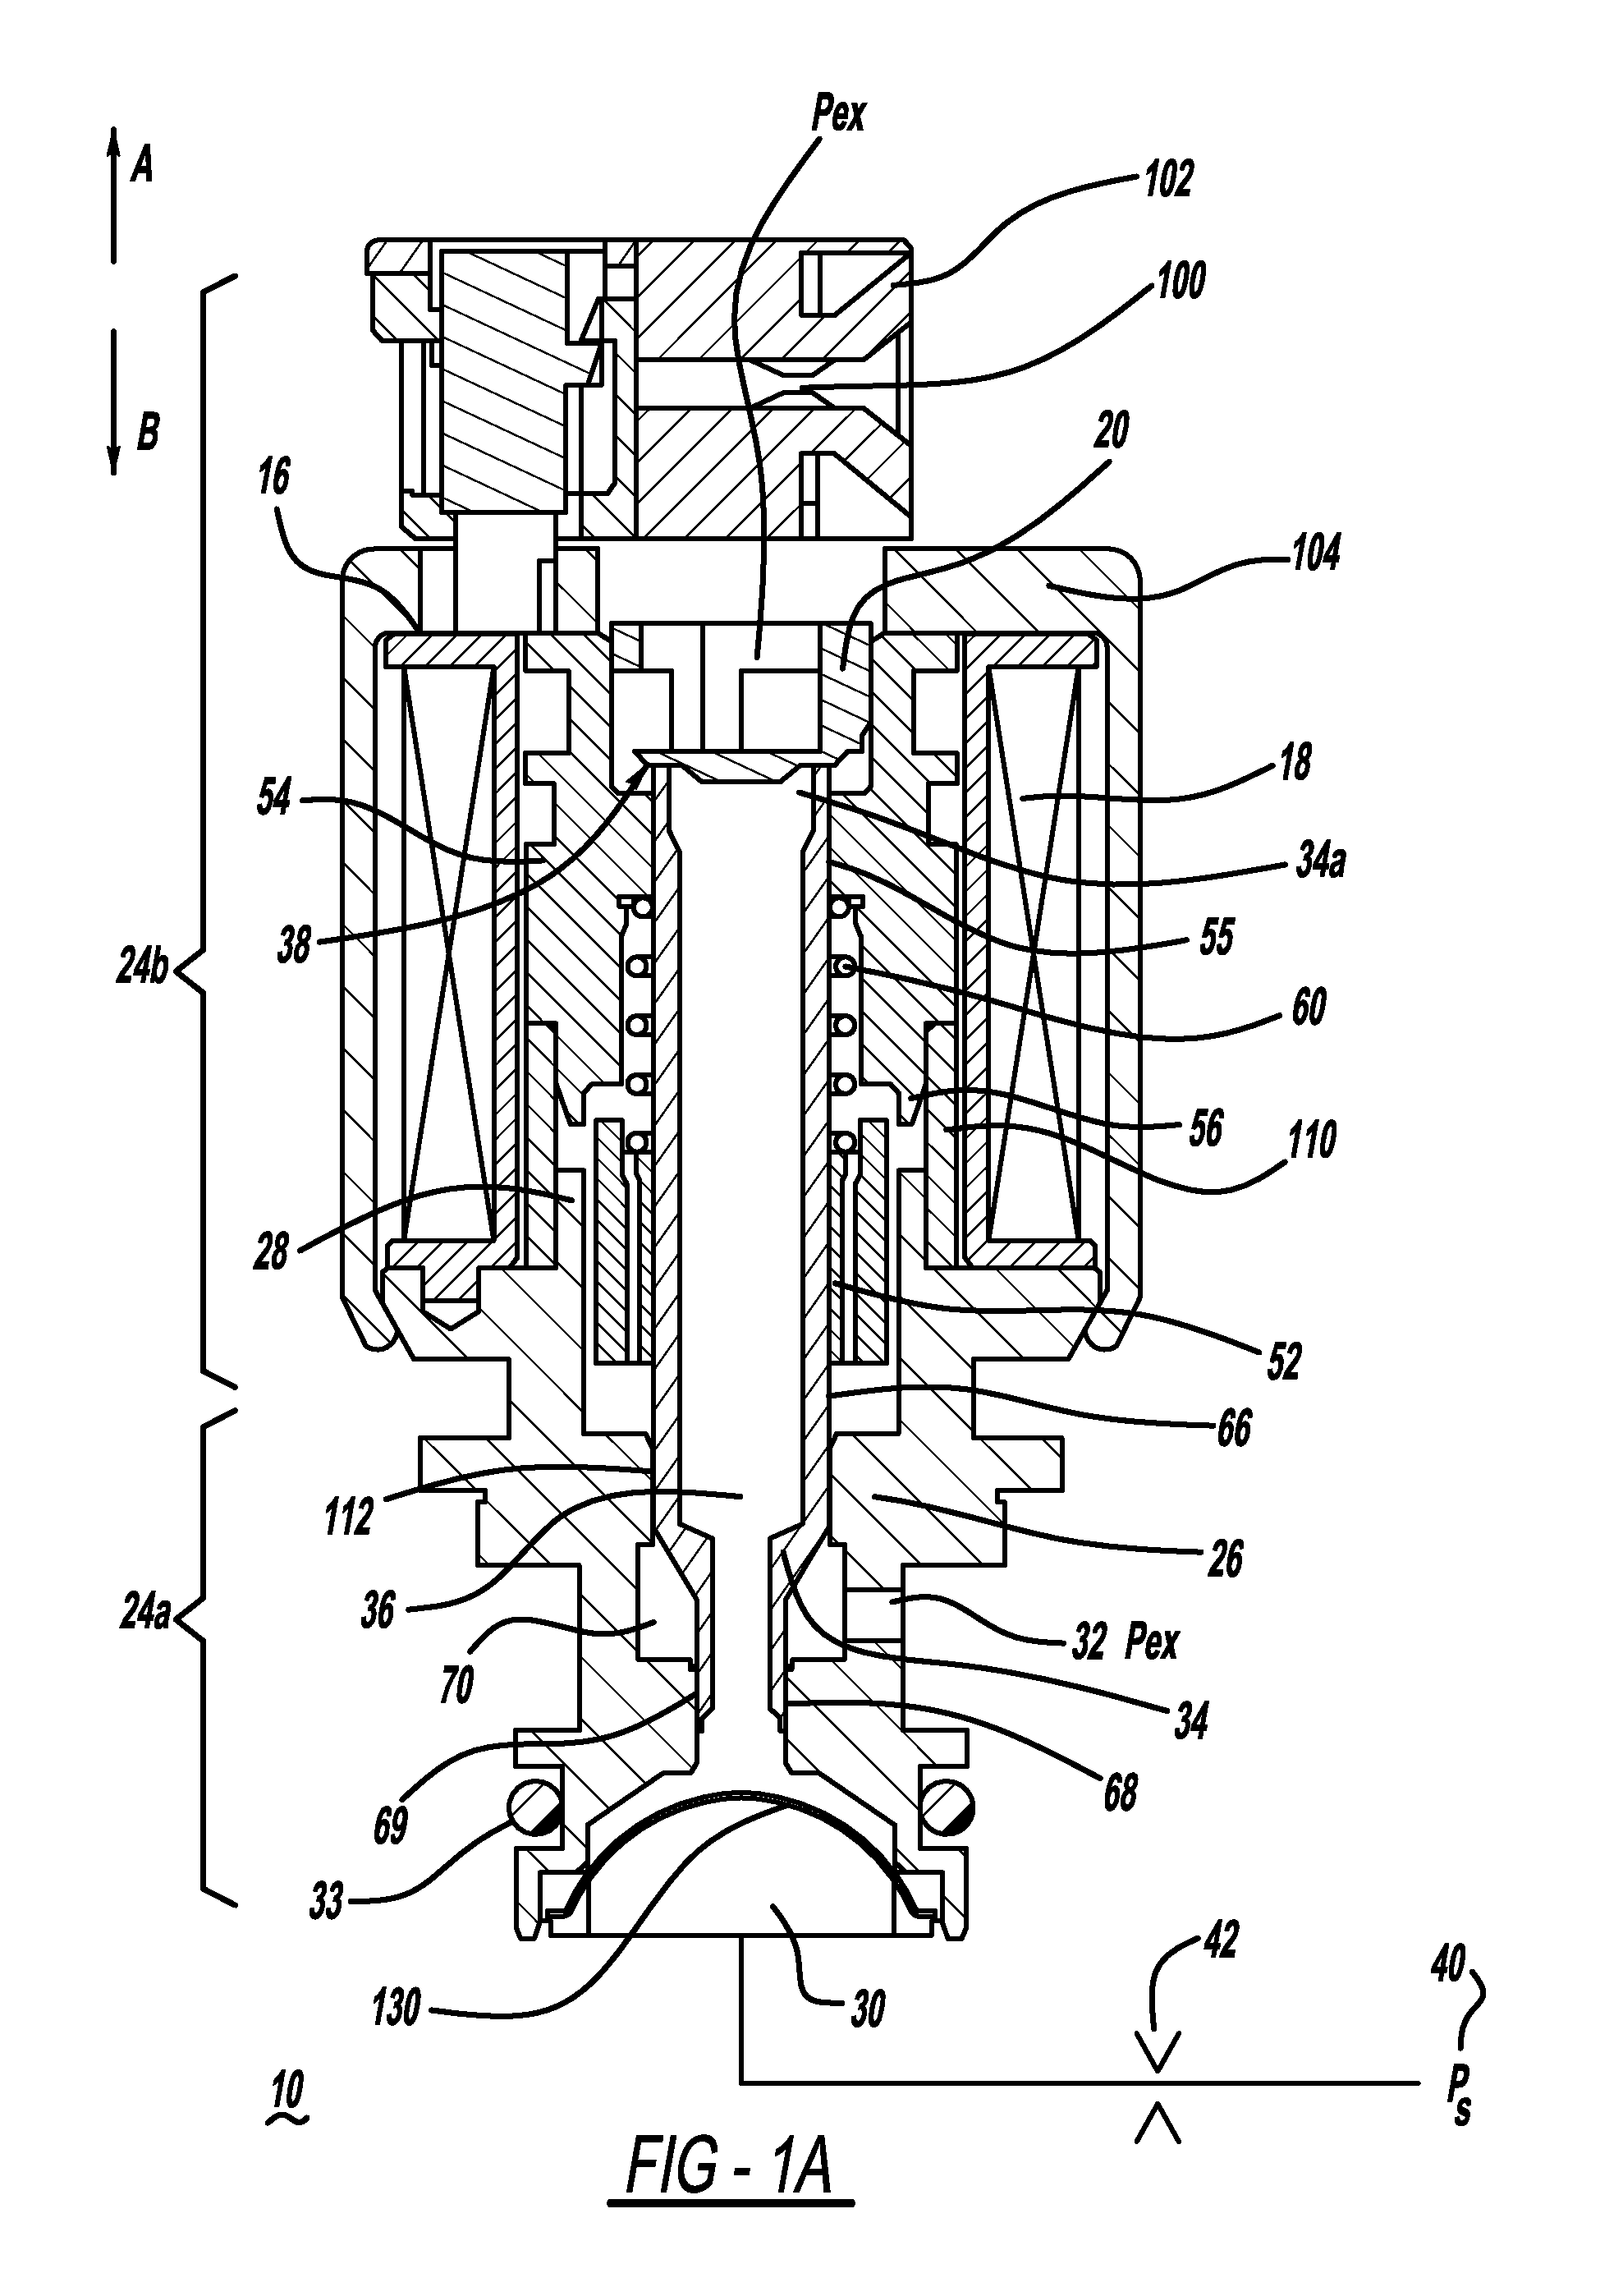 Open end variable bleed solenoid (VBS) valve with inherent viscous dampening